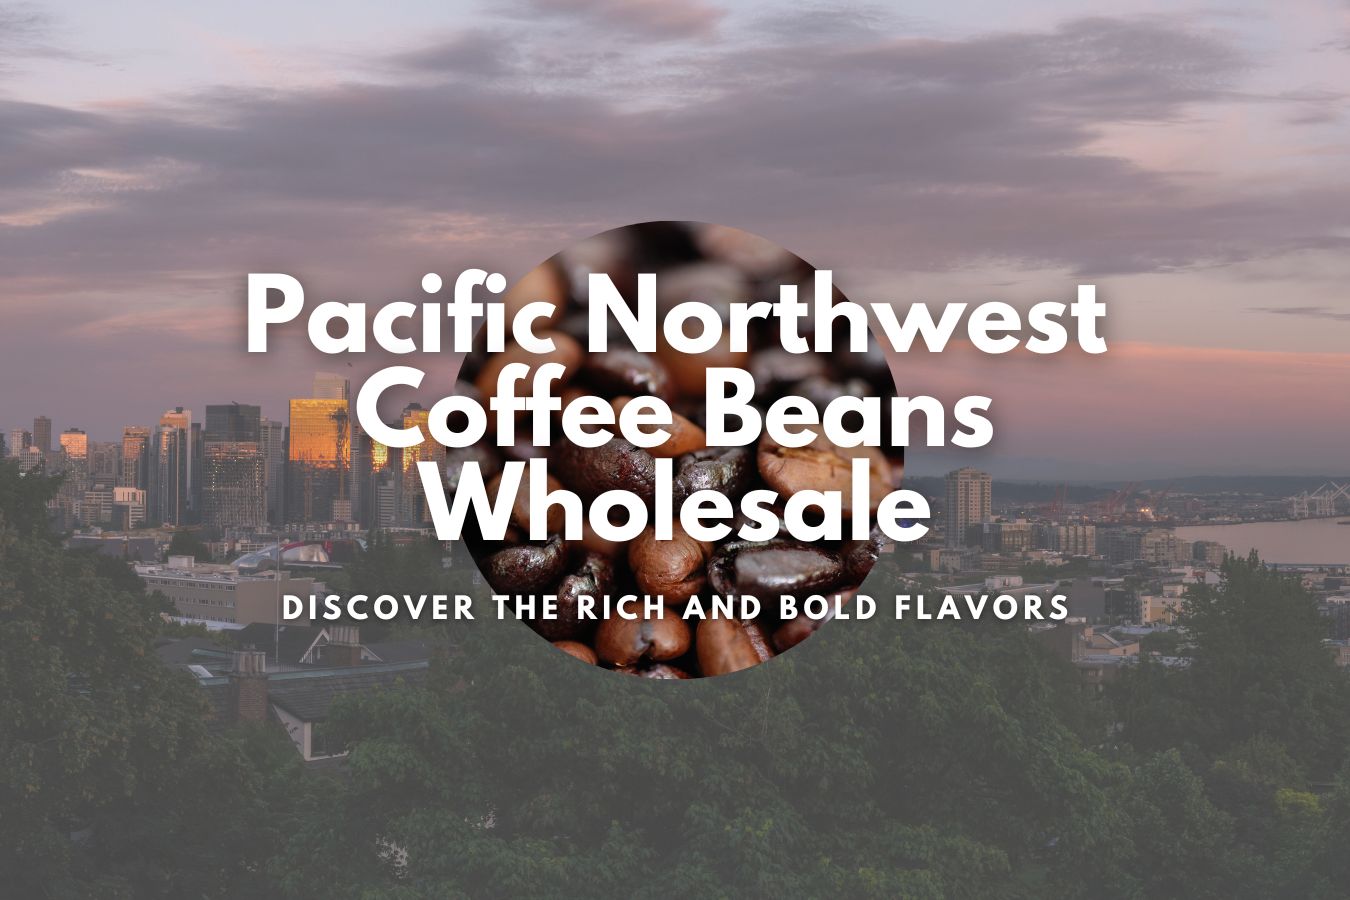 Pacific Northwest Coffee Beans Wholesale: Discover the Rich and Bold Flavors